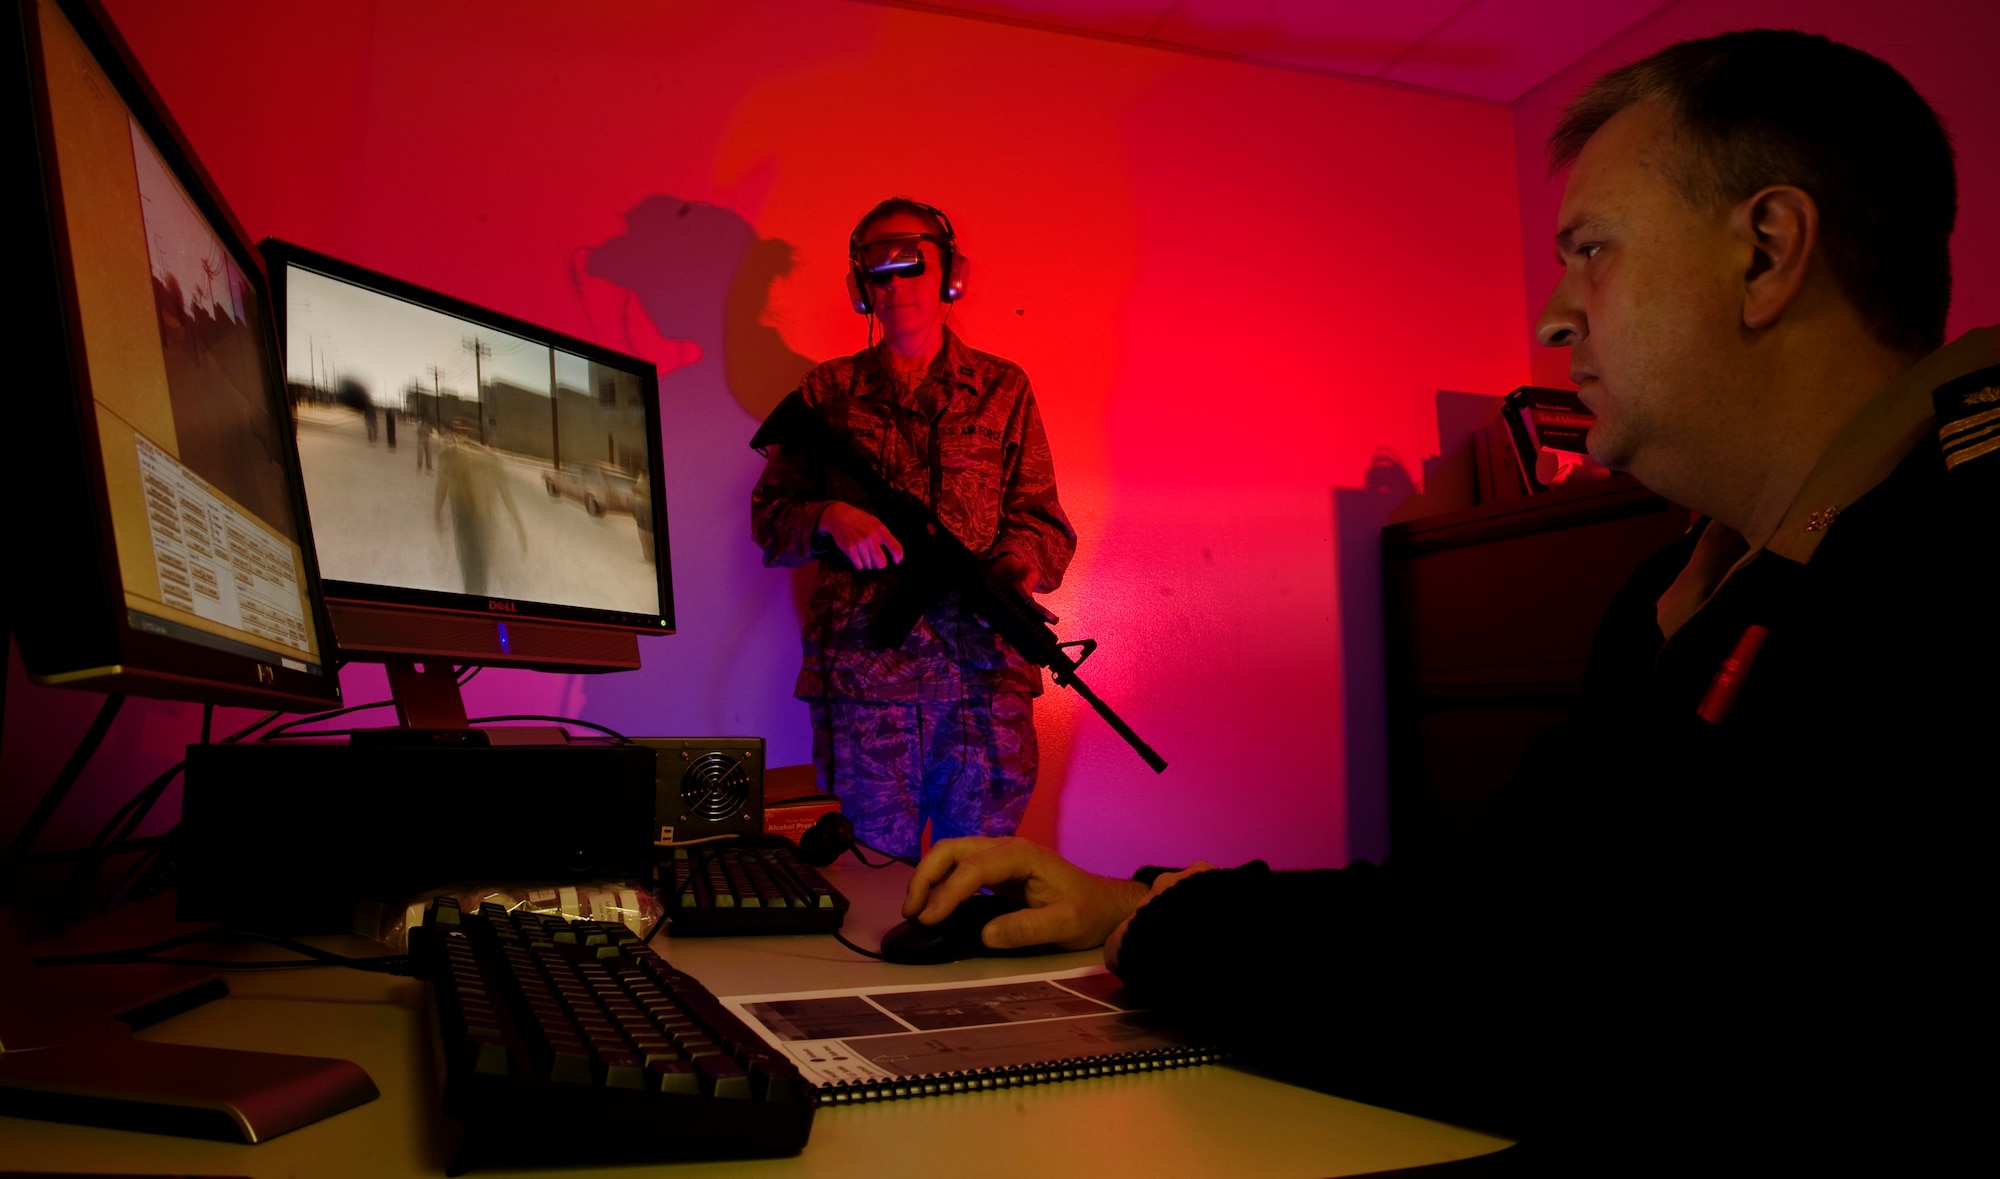 Captain Heather Bautista (standing) and Lieutenant Commander William Satterfield, checks the operation of a virtual reality software for returning veterans with combat post traumatic stress disorder at the David Grant USAF Medical Center at Travis Air Force Base, Calif., April 17. Capt. Bautista, U.S. Air Force and LCDR. Satterfield, U.S. Public Health Service are assigned to the center's mental health clinic. (U.S. Air Force photo/Lance Cheung)
